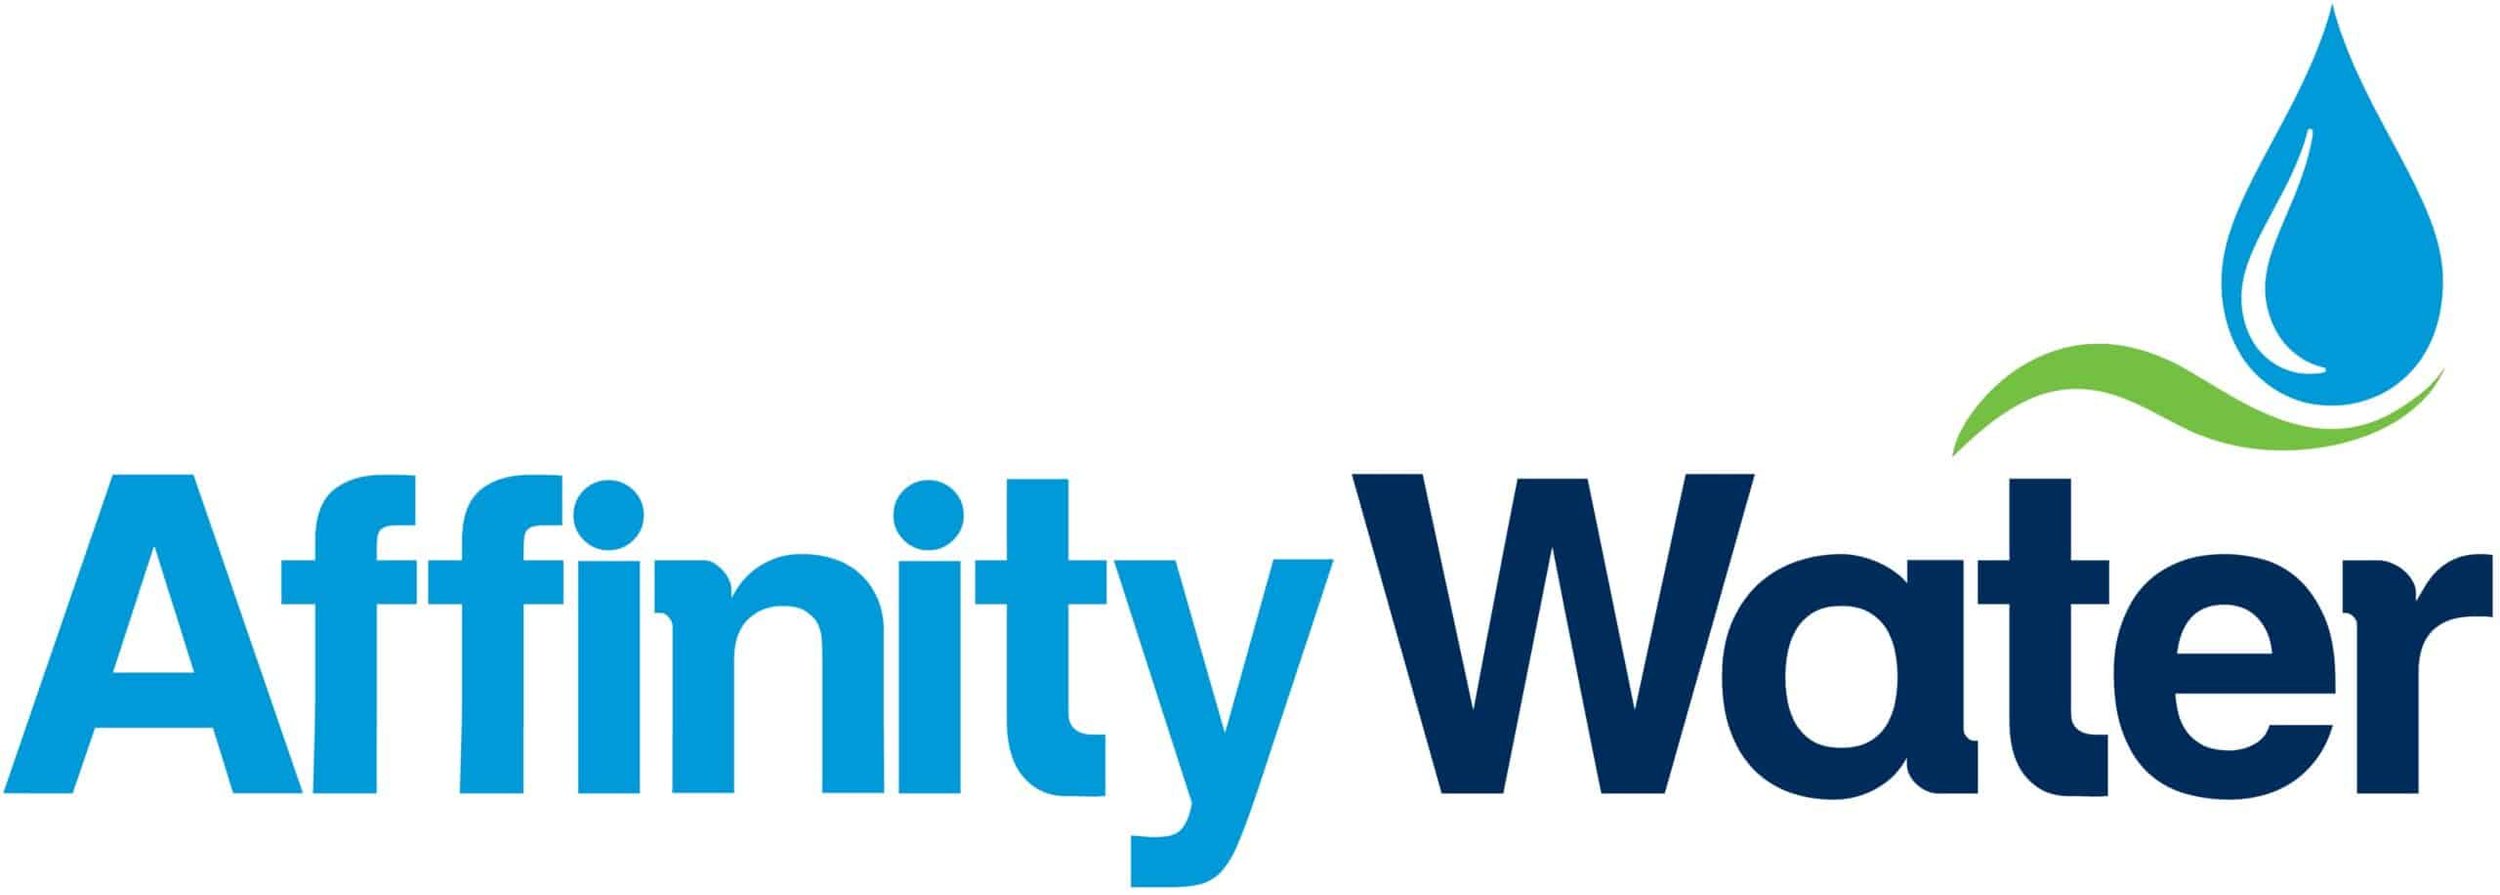 AFFINITY-WATER-Logo-Colour-Hi-Res-scaled.jpg